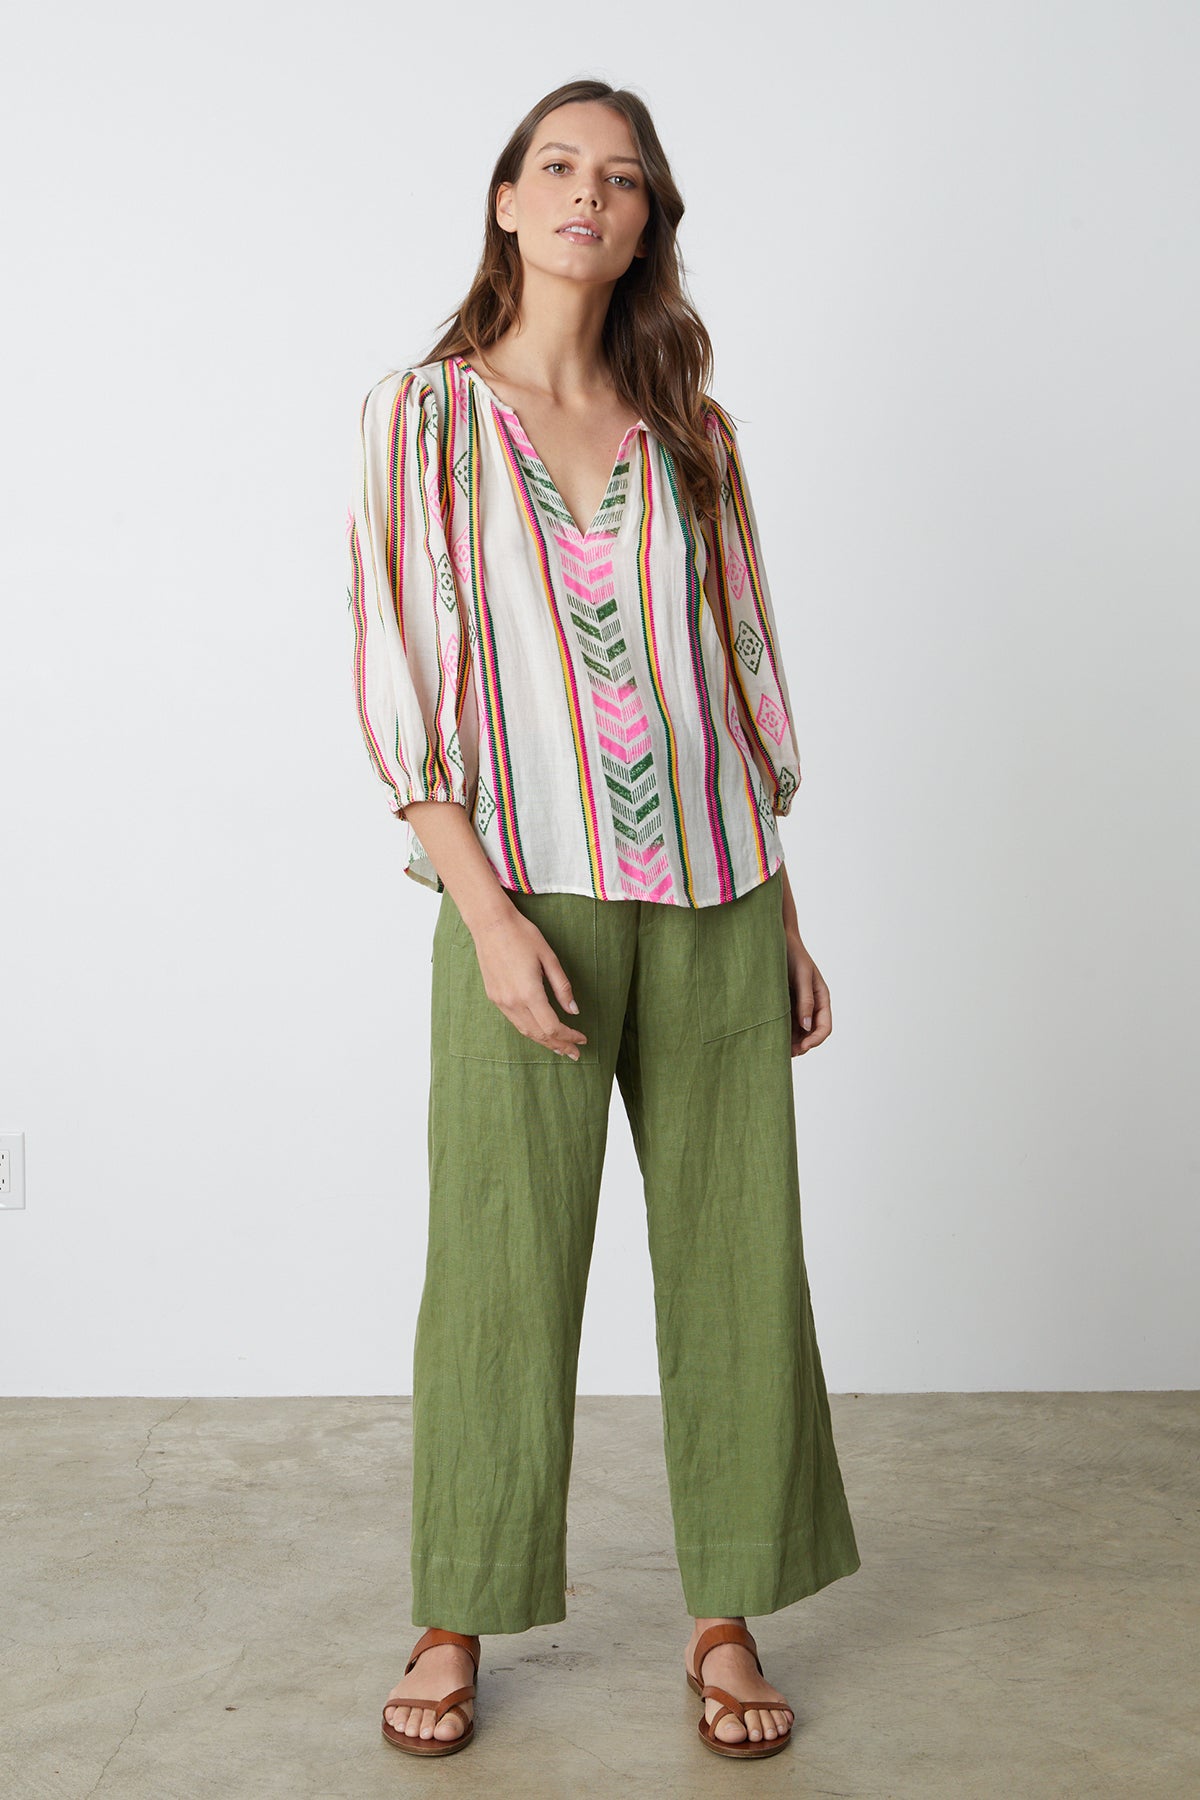 Beth Boho Top in multi colored jacquard print with Dru pant in basil green full length front-26255707406529